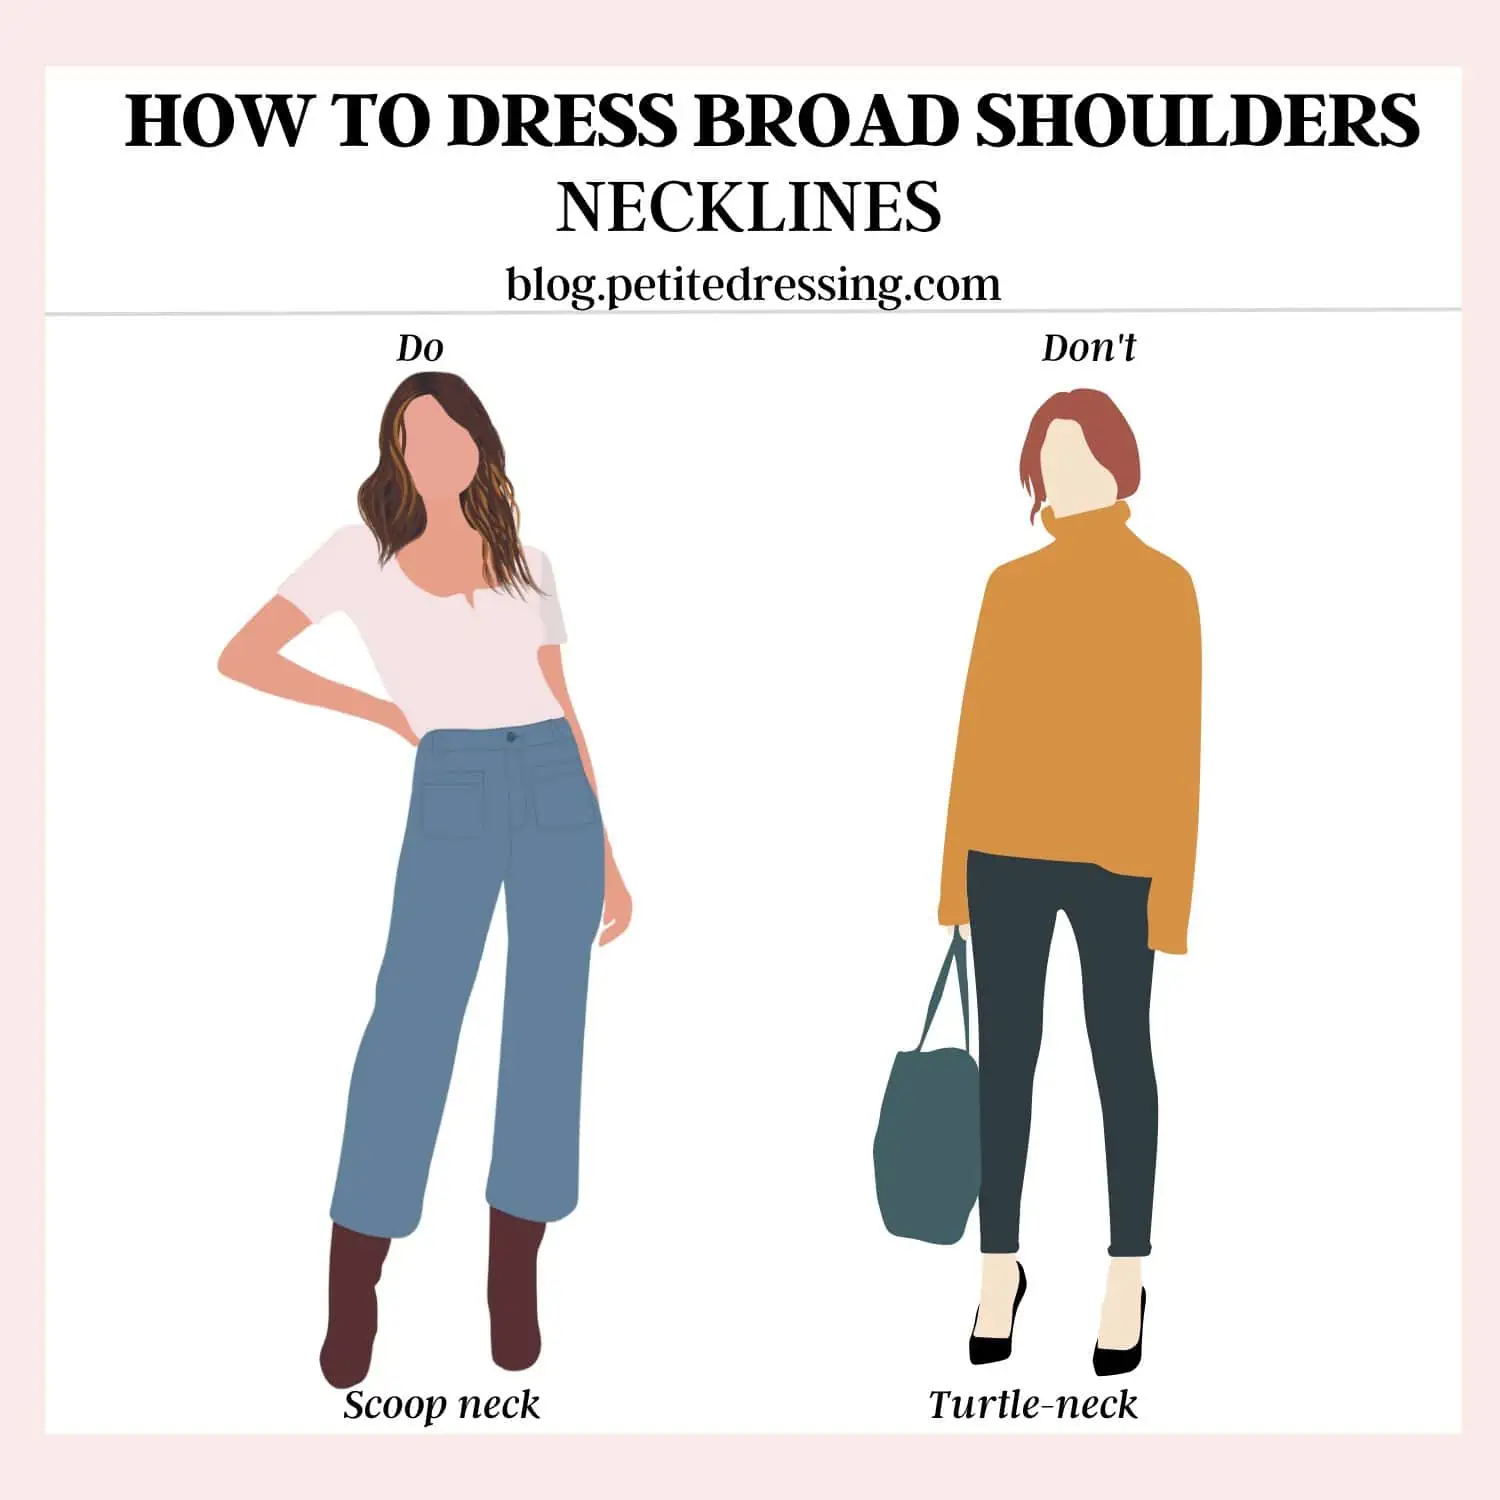 A scoop neck flatters broad shoulders because it softens the